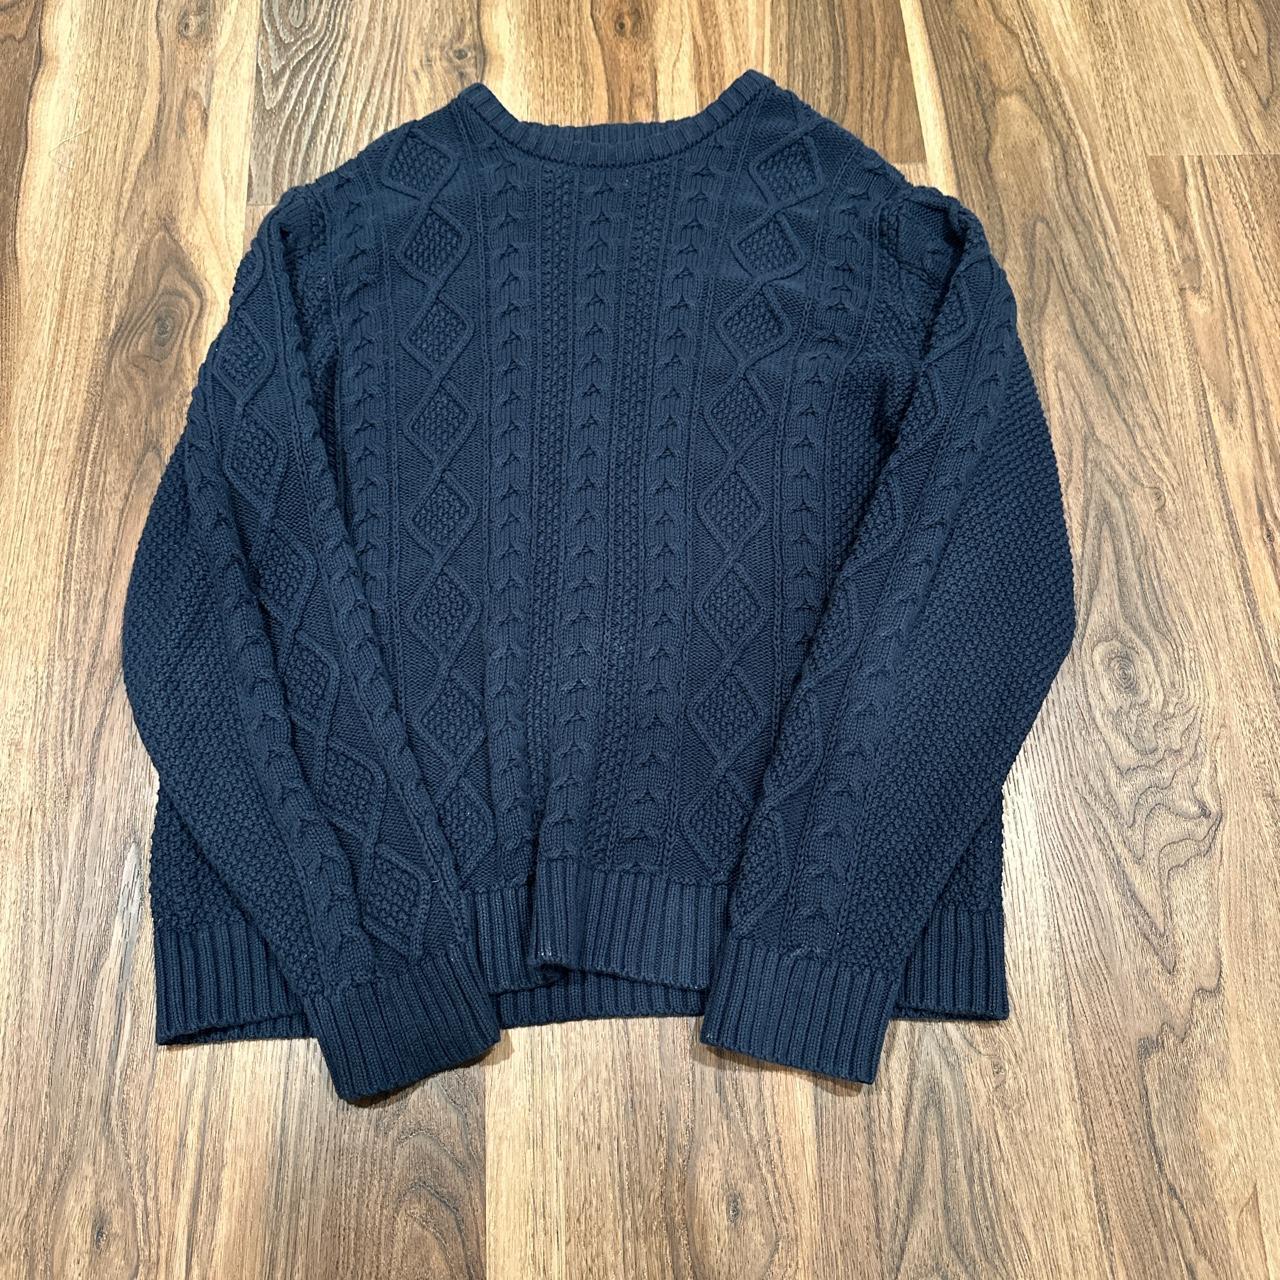 Large waffle knit sweater. Great design on the... - Depop